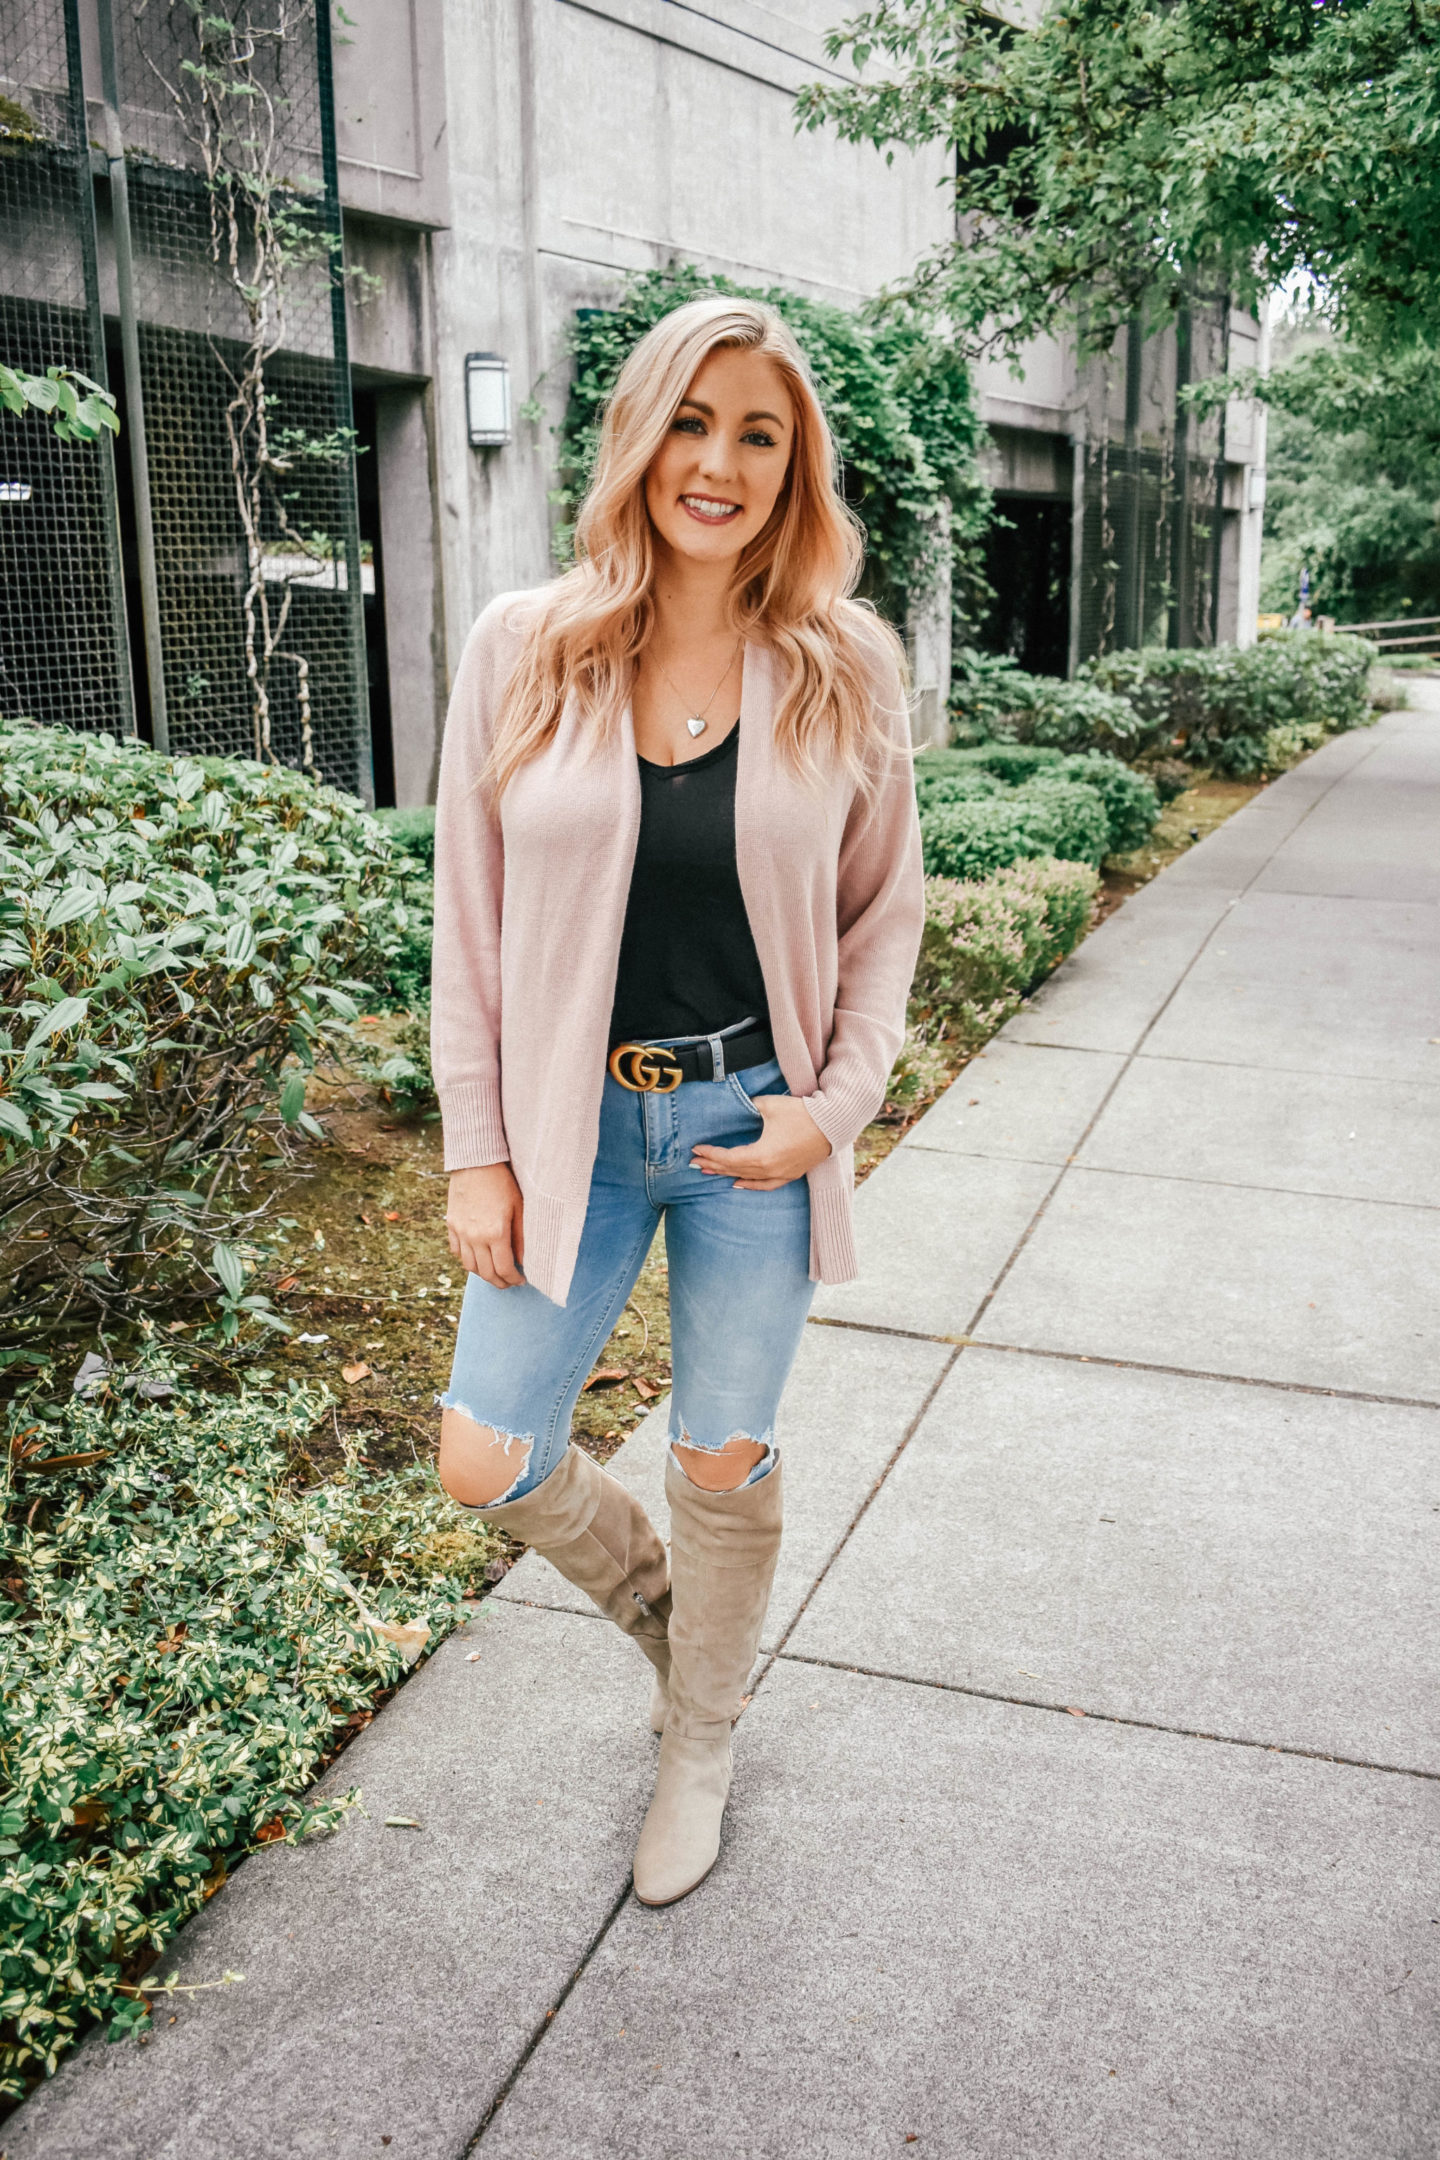 Easy To Recreate Fall Outfit Idea! - Amy Bjorneby